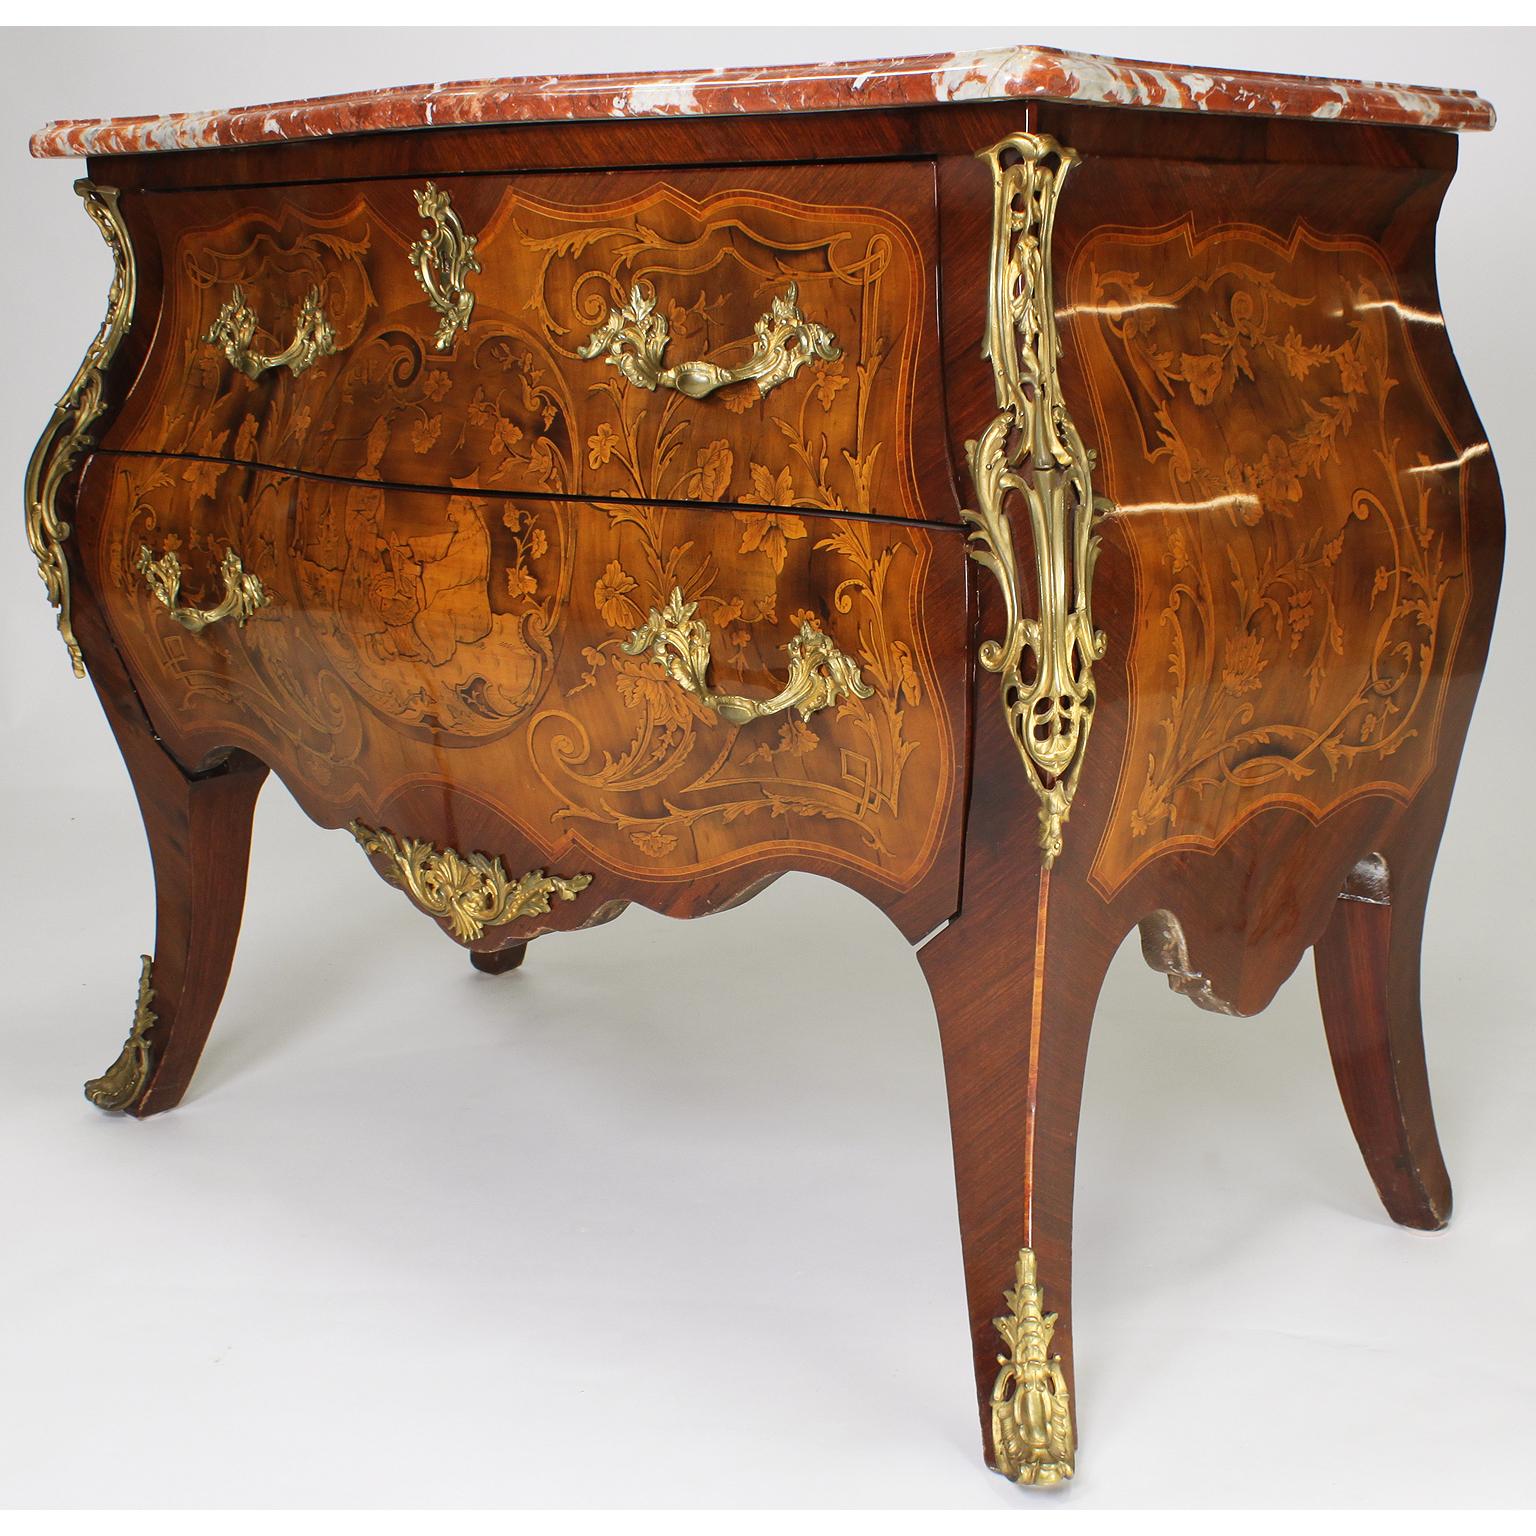 A fine French 19th-20th century Louis XV style gilt-bronze mounted tulipwood chinoiserie marquetry two-drawer bombé commode with a veined rouge royal marble top. The serpentine shaped body centered with a marquetry medallion depicting a seated